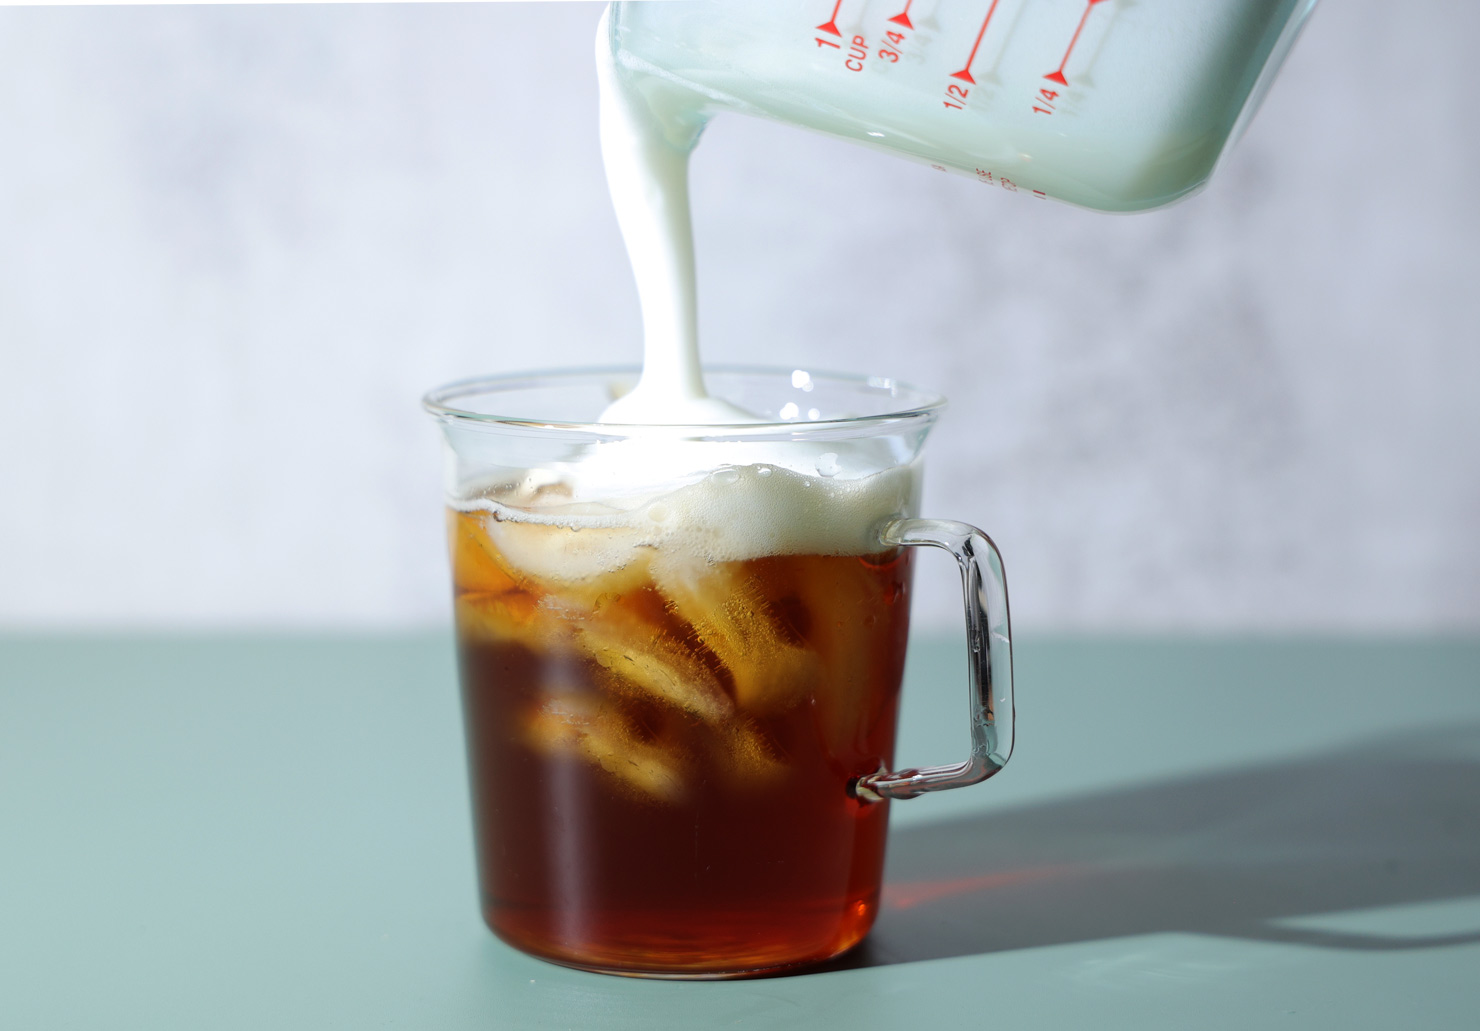 How to Make Cold Foam at Home Like a Barista